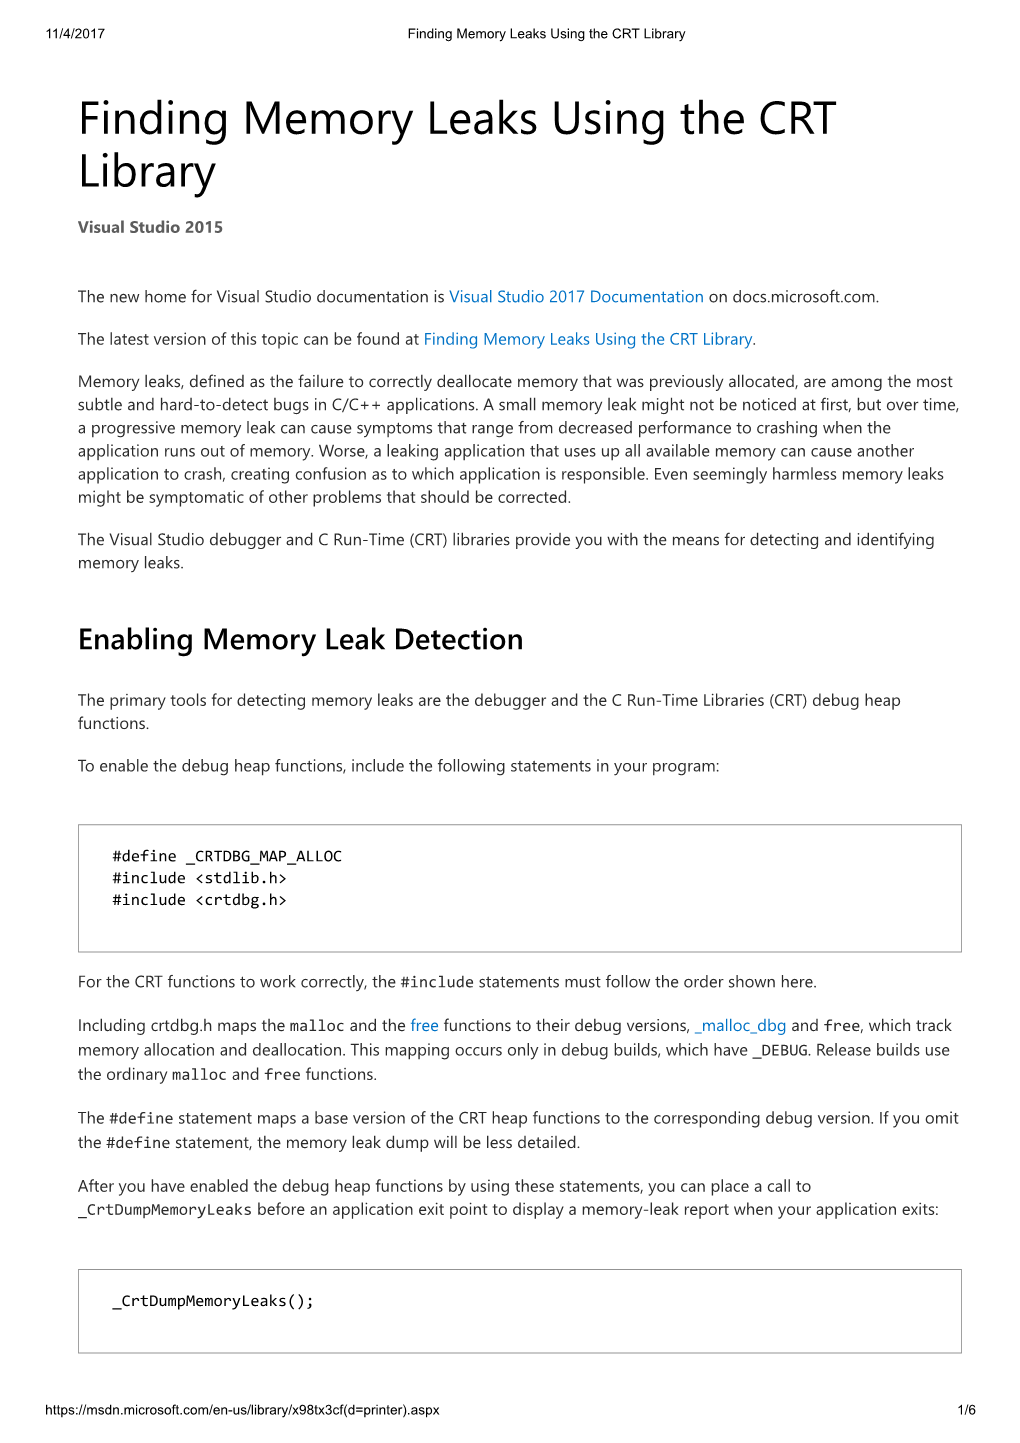 Finding Memory Leaks Using the CRT Library